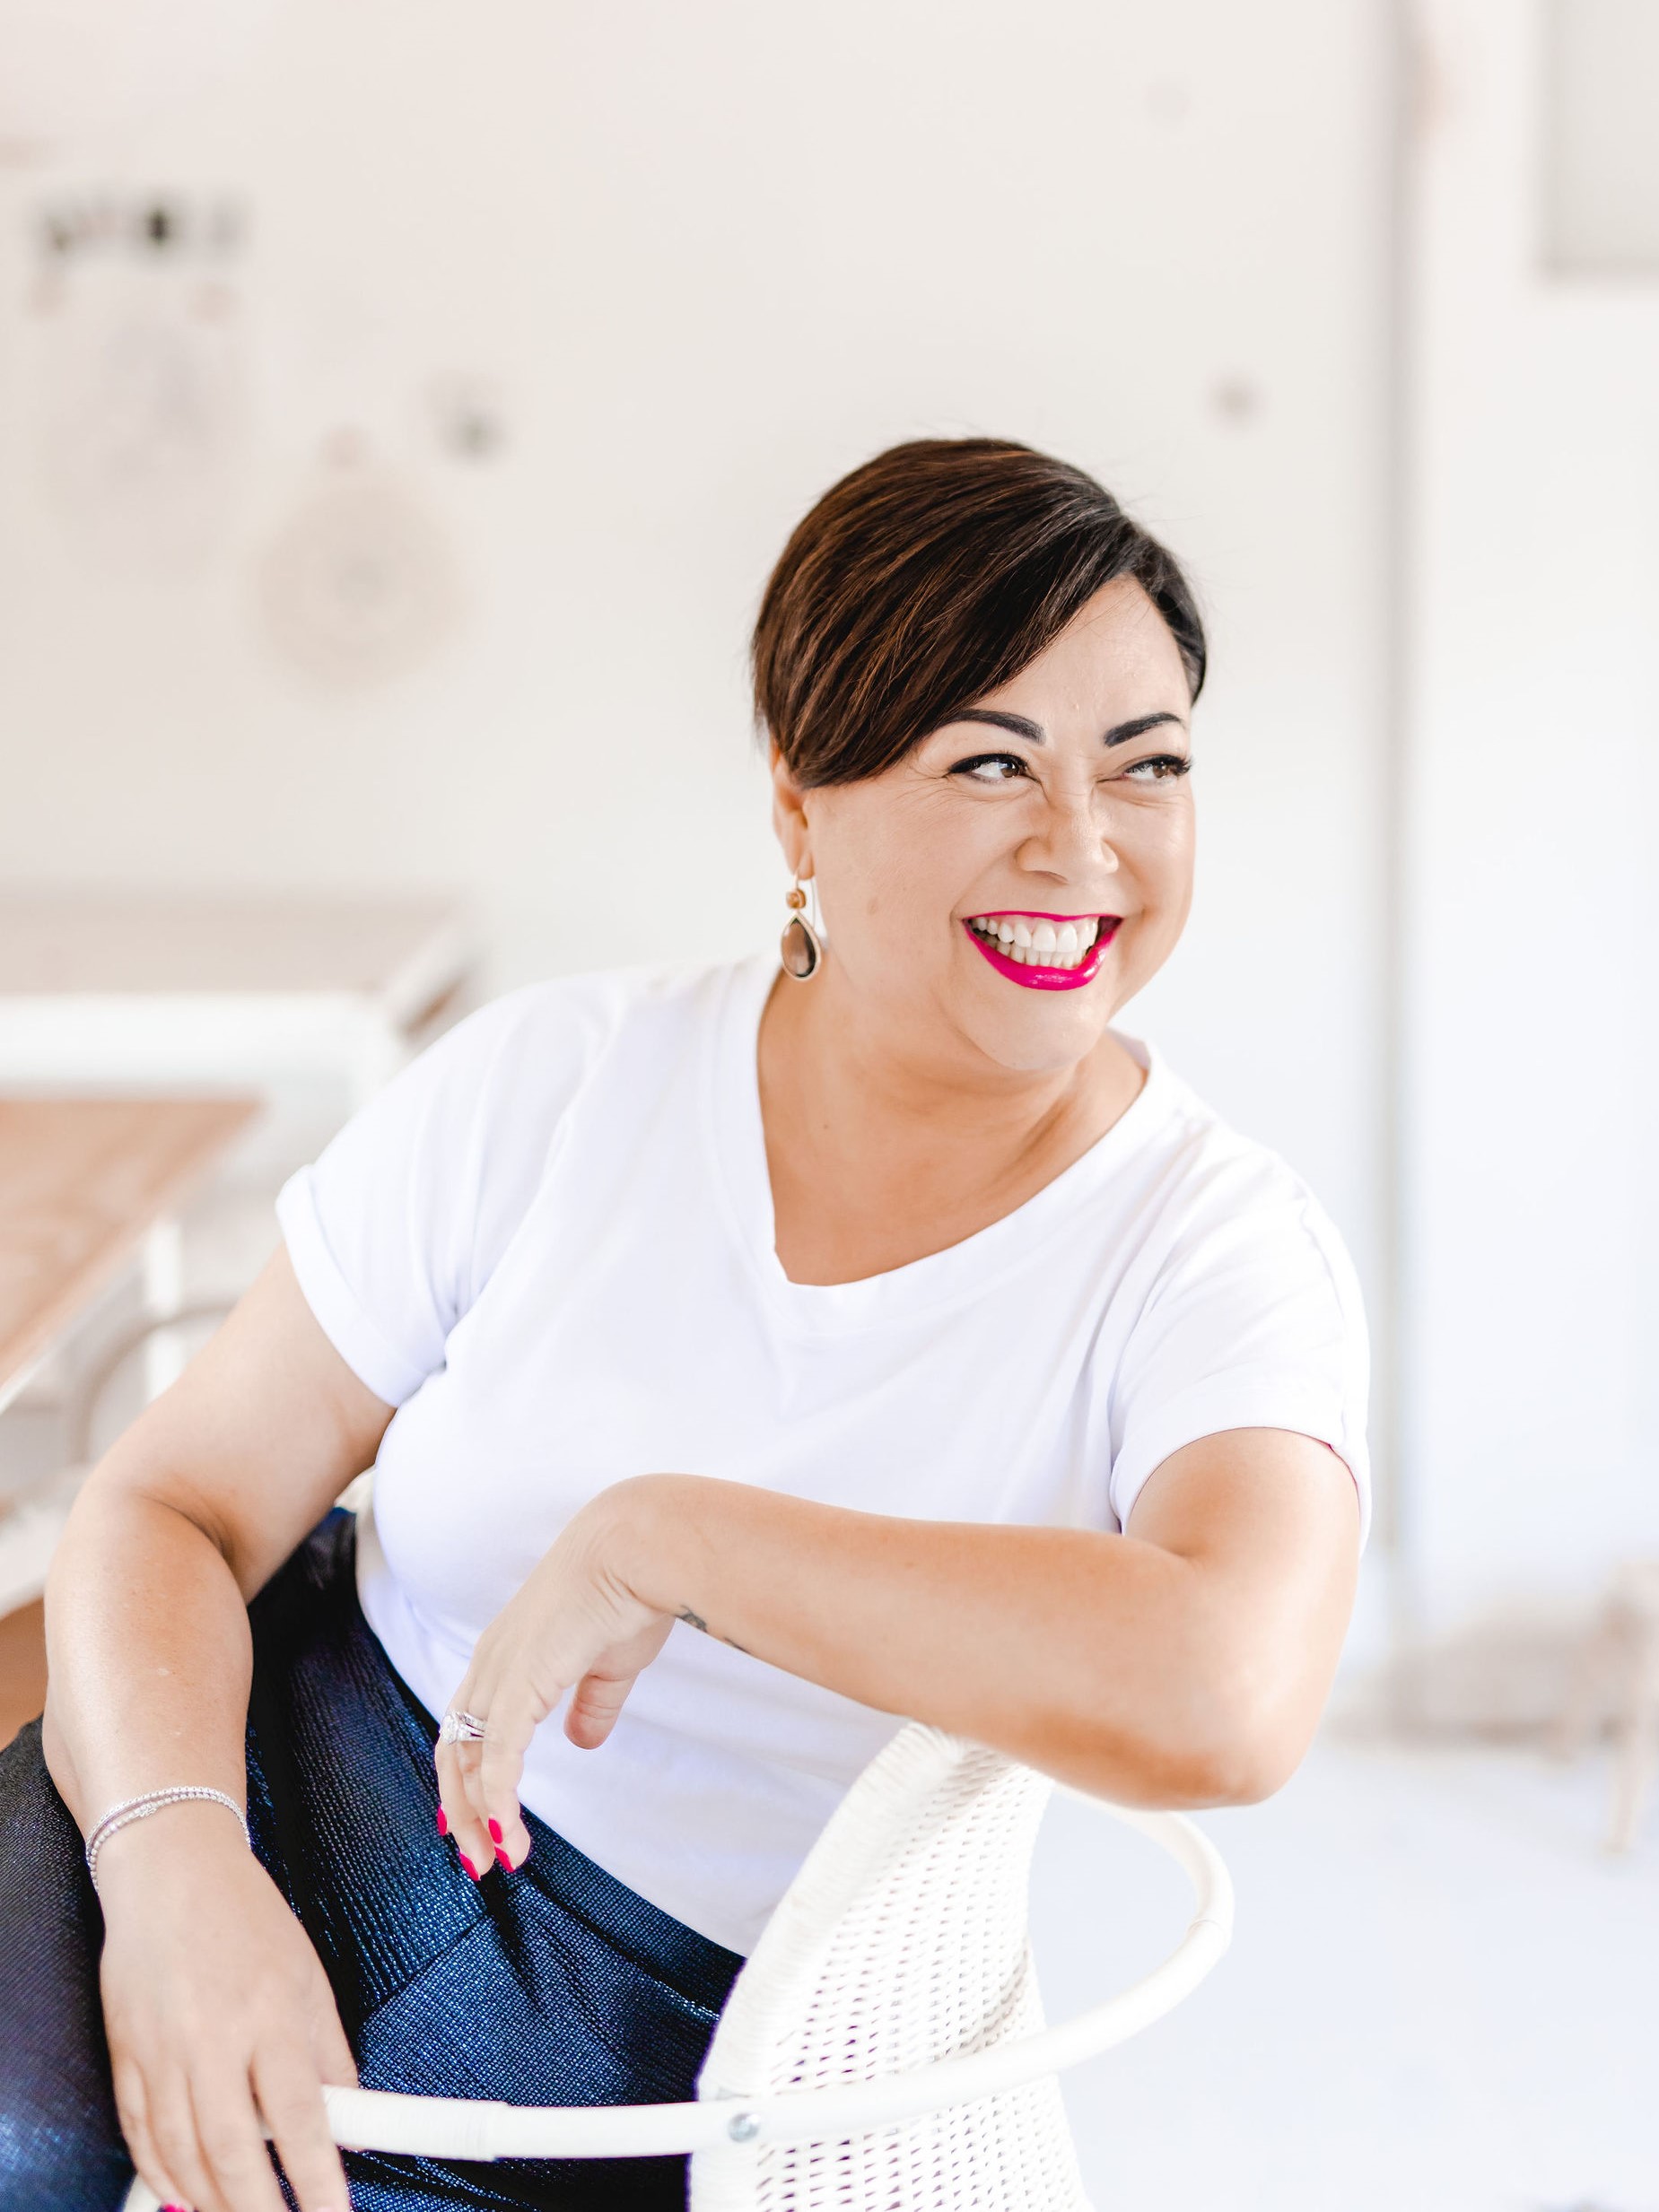 Lala brings 20+ years of practical business experience to her mentorships